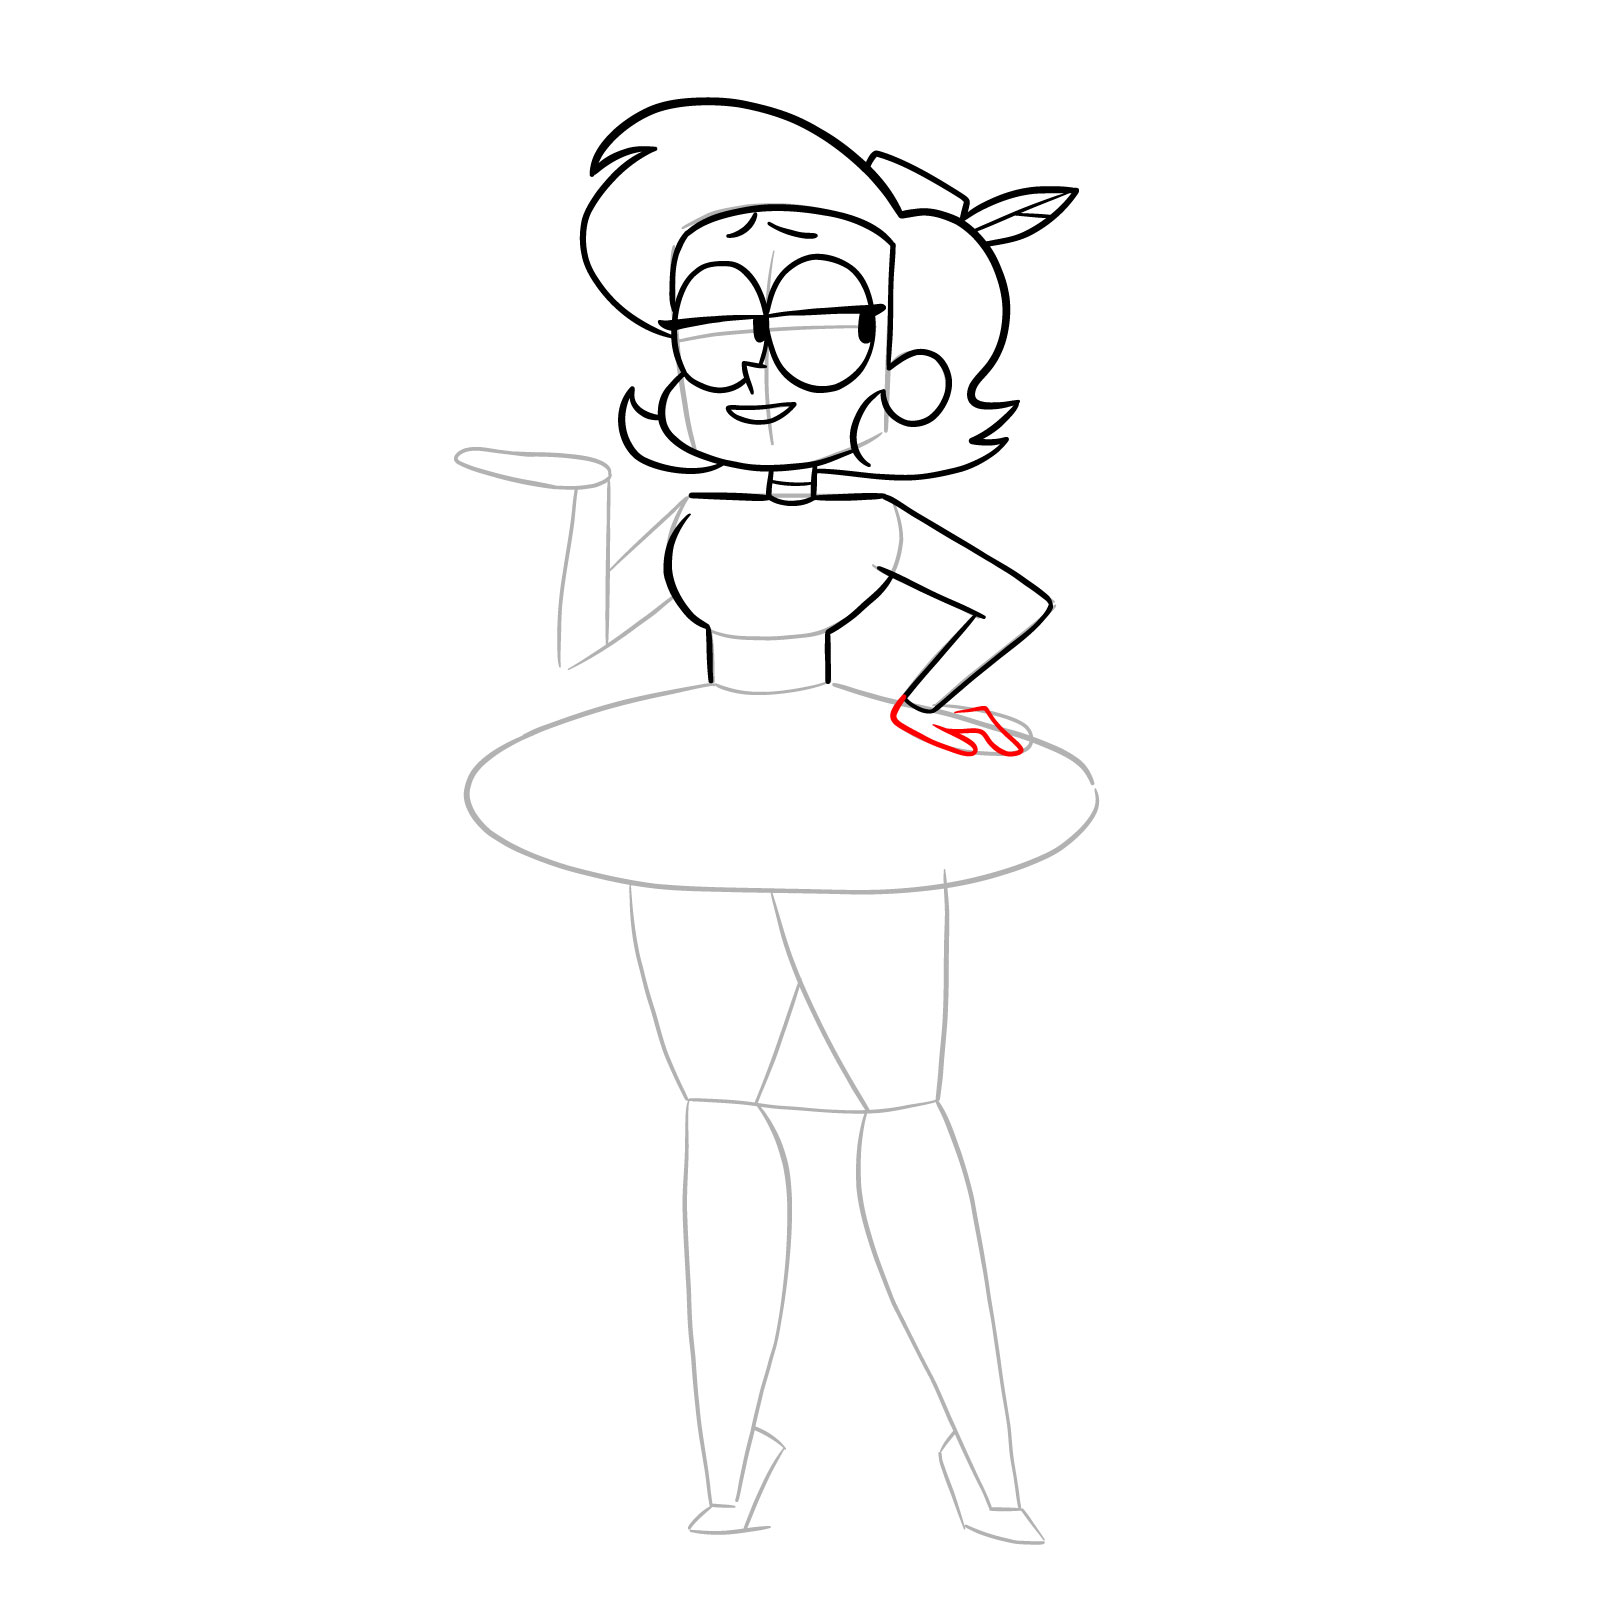 How to draw Elodie from OK K.O.! - step 19